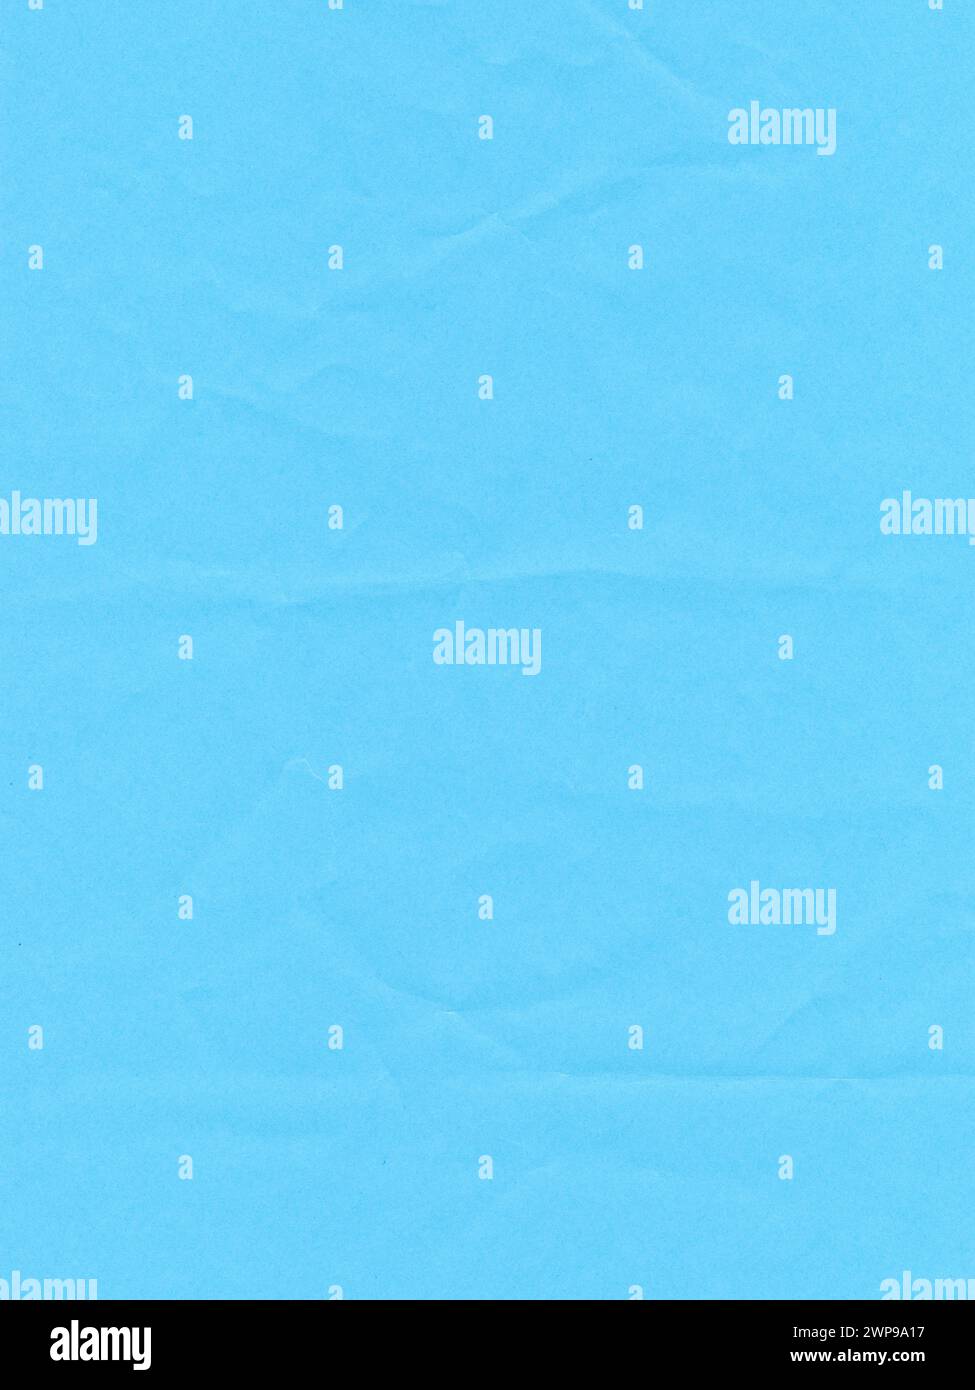 Texture of colored paper, surface of a crumpled light blue sheet of paper Stock Photo